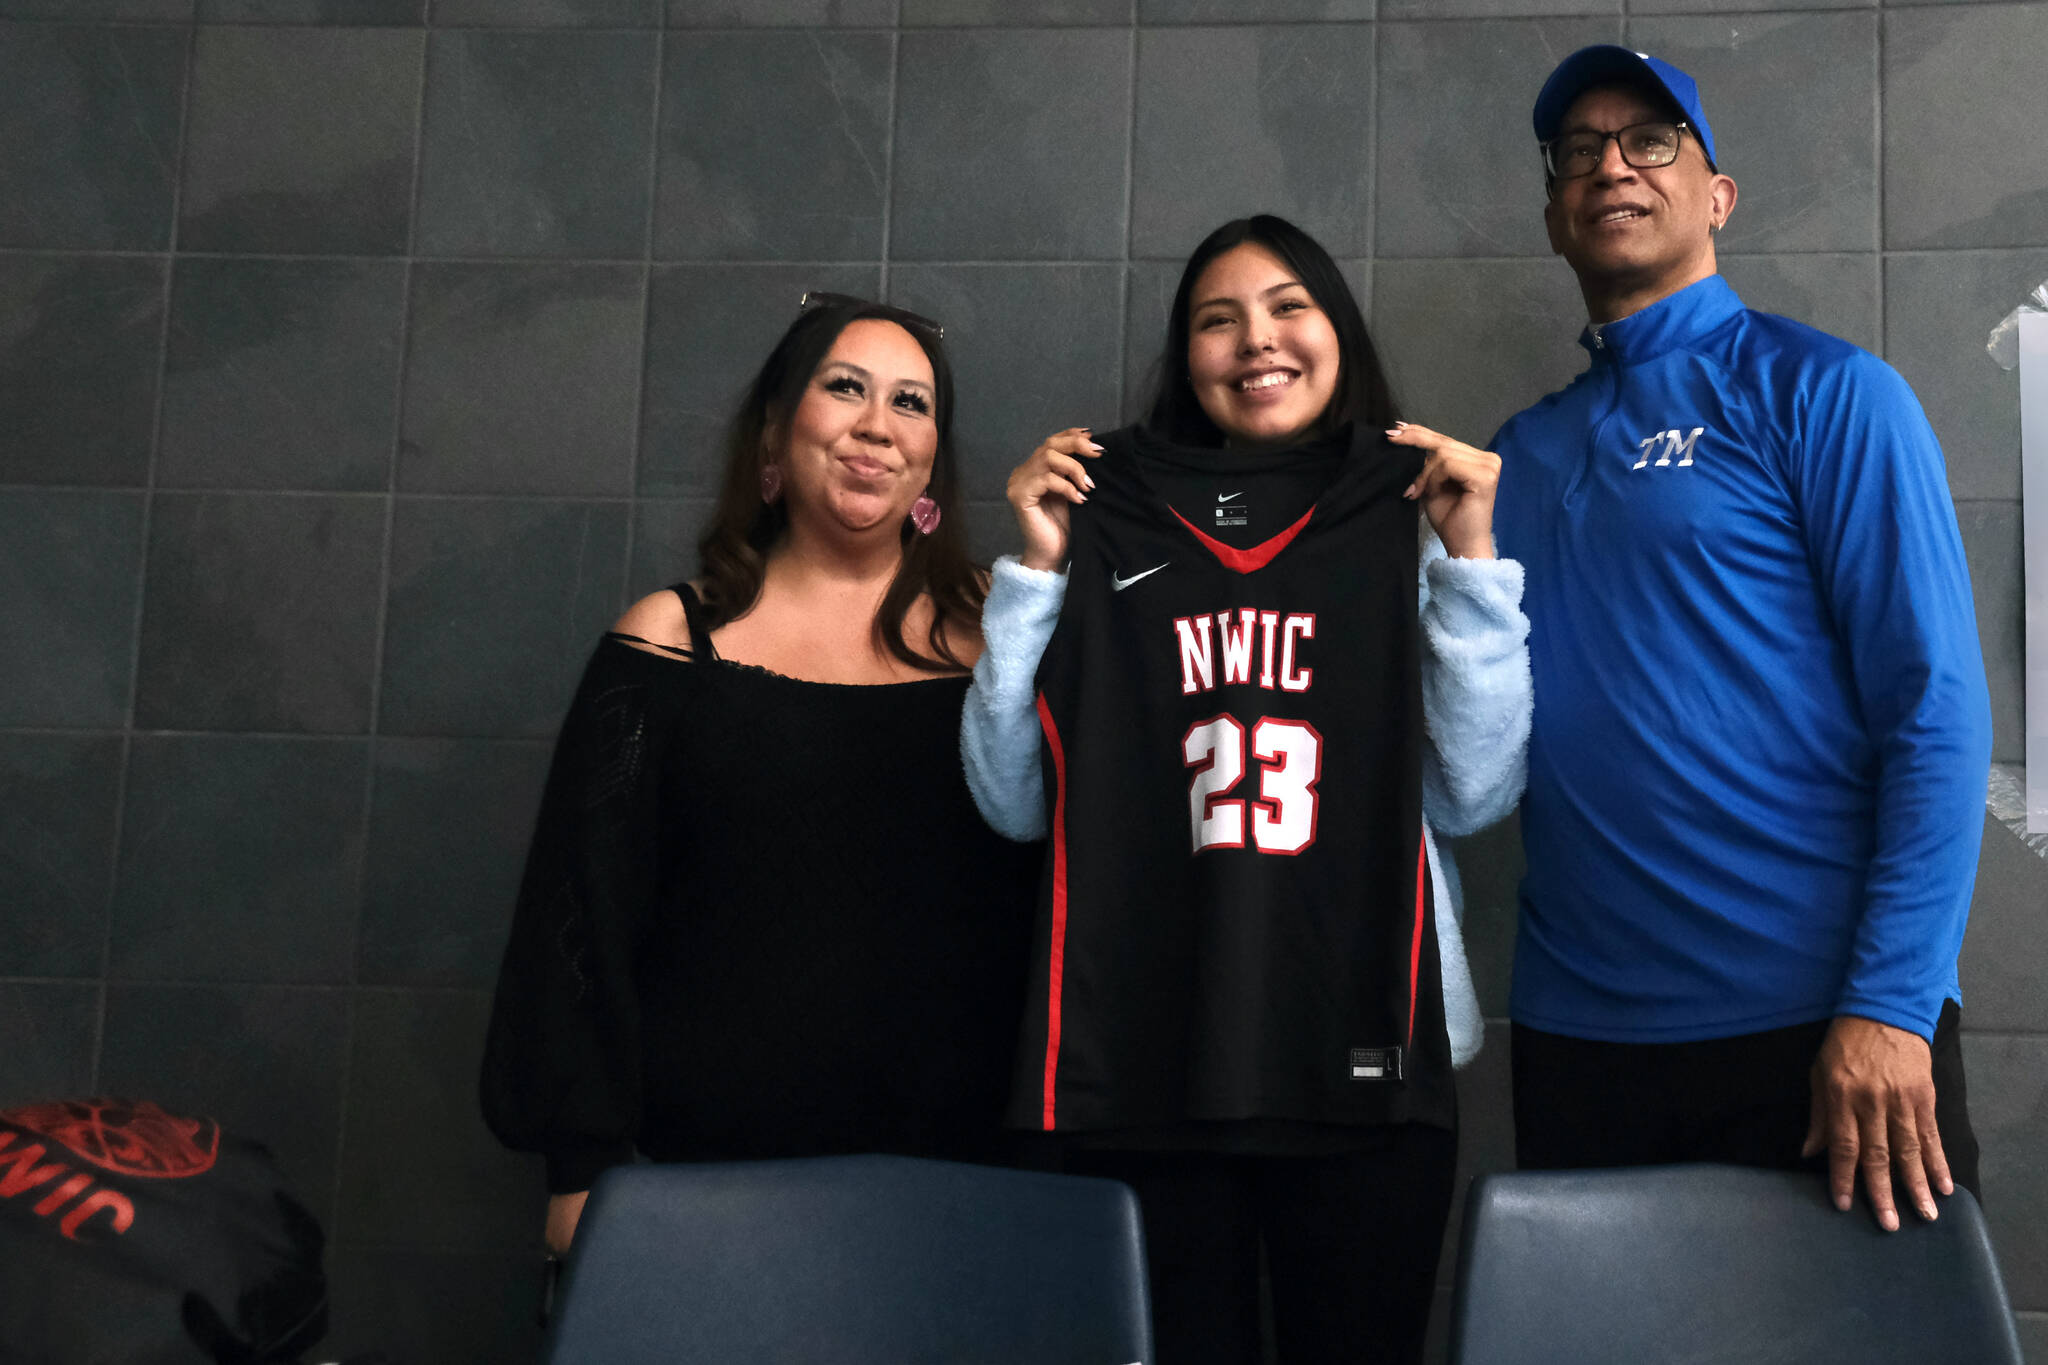 Thunder Mountain High School senior Kiara Kookesh holds a Northwest Indian College jersey after signing to play college basketball for the Bellingham, Washington, school on Monday while flanked by her mother Marcie Kookesh and TMHS coach Andy Lee. (Klas Stolpe / Juneau Empire)